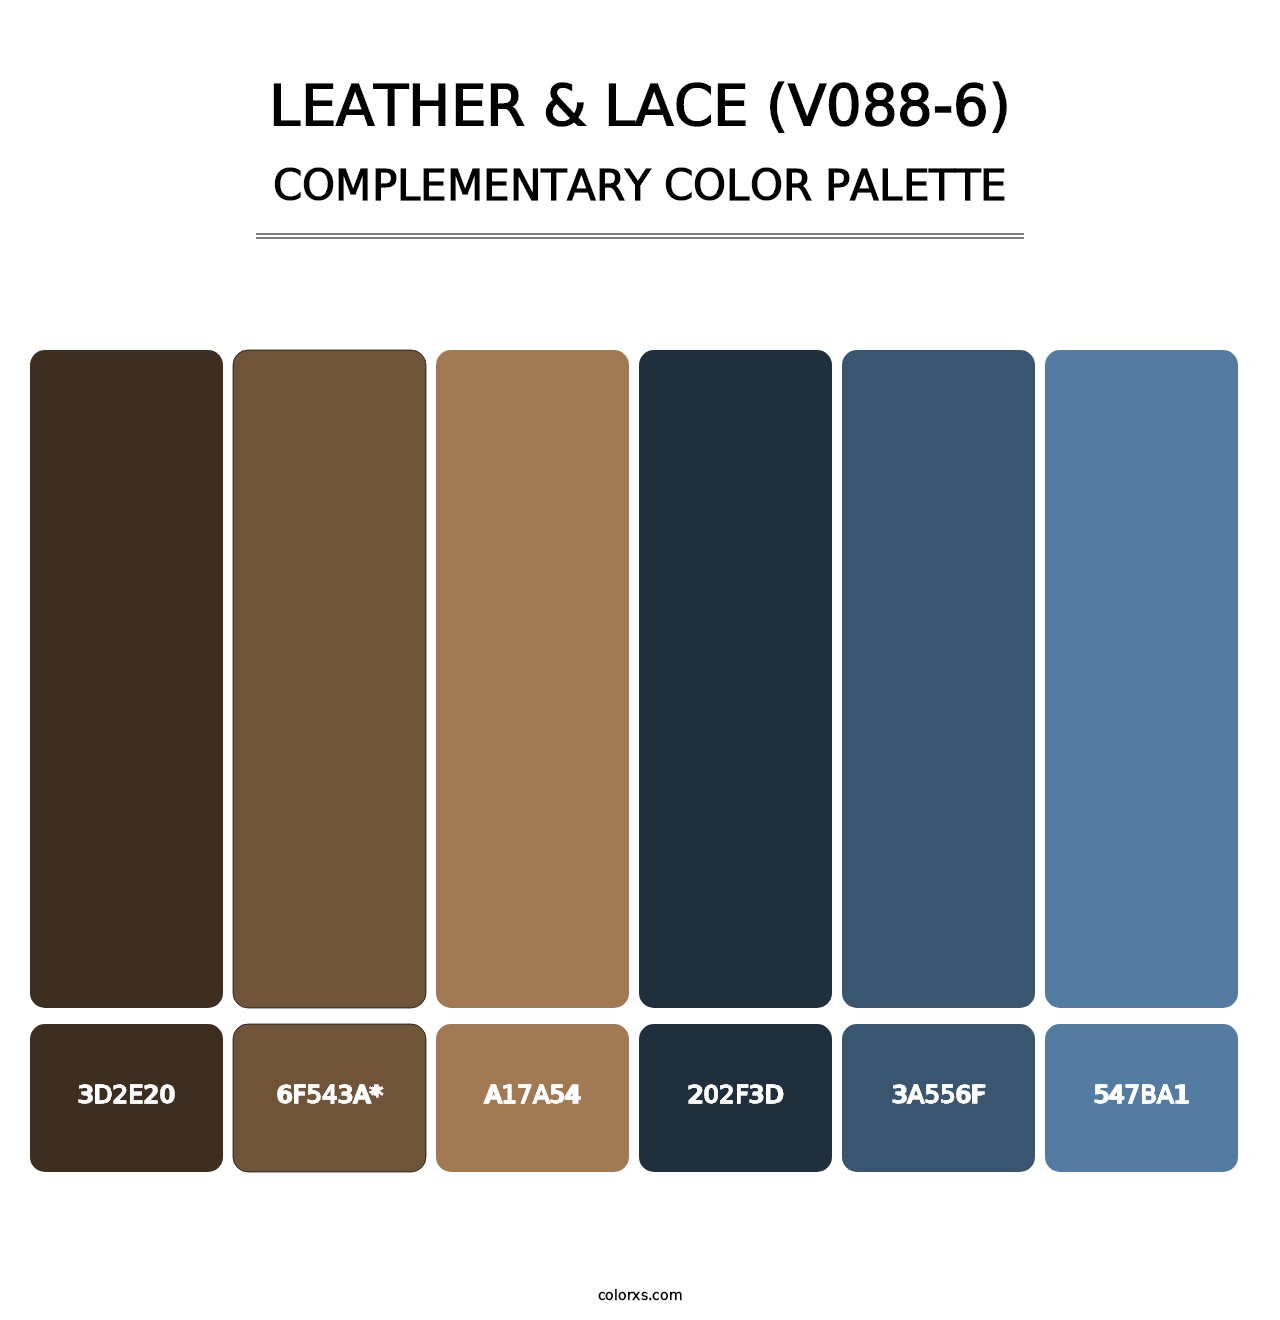 Leather & Lace (V088-6) - Complementary Color Palette